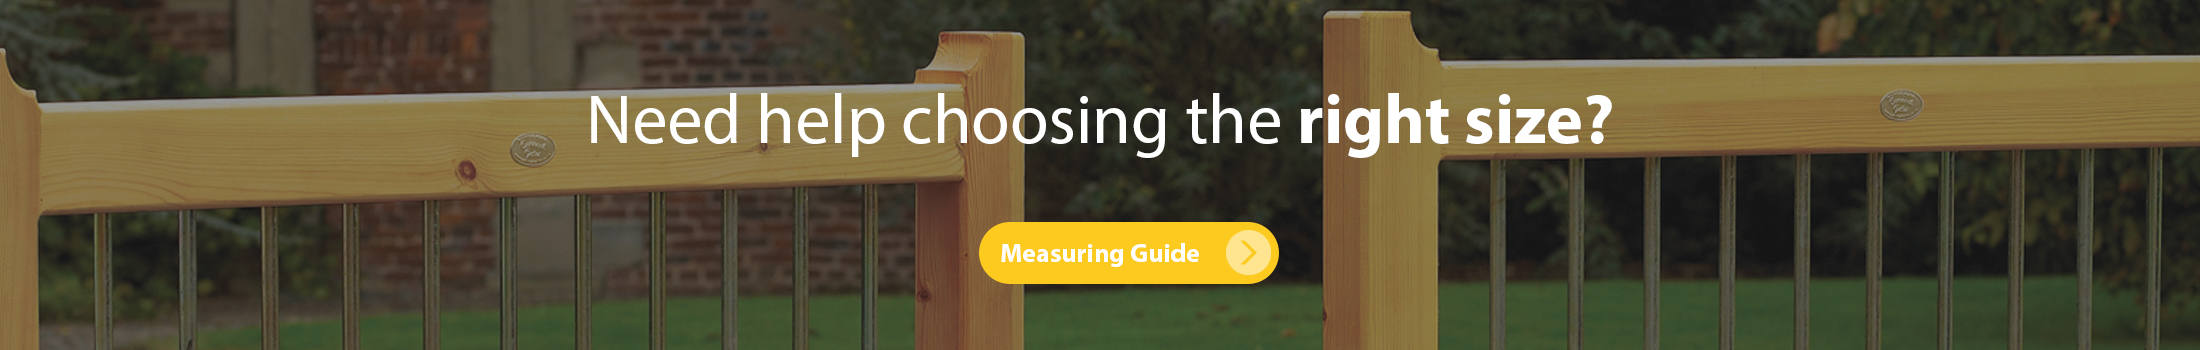 Take a look at the measuring guide here